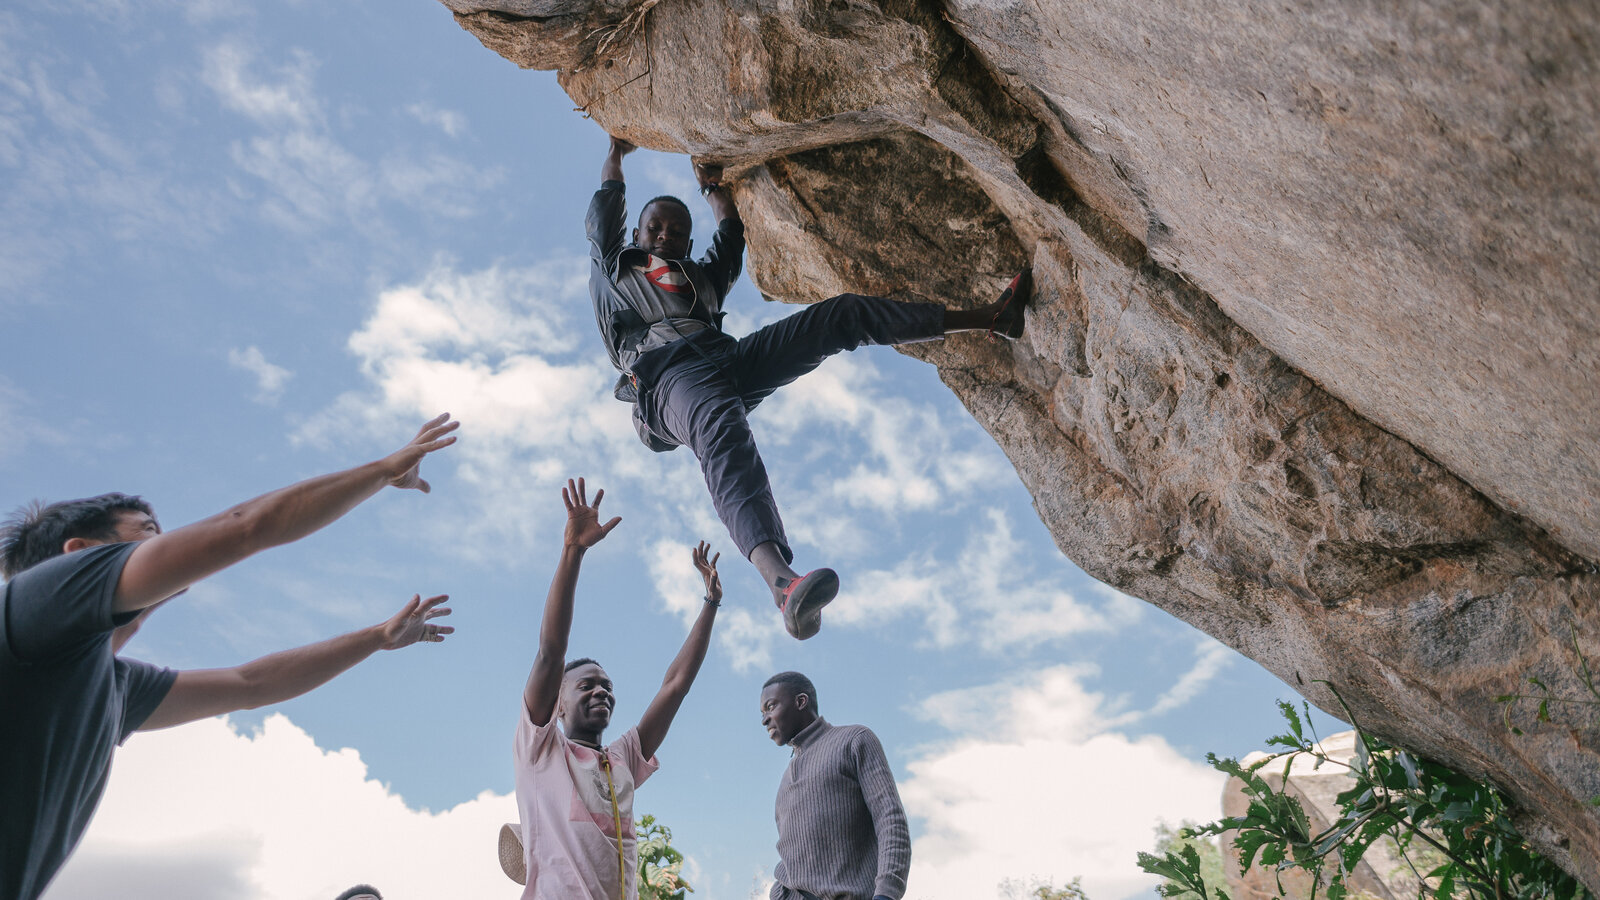 Why People Love Rock Climbing: The Thrill and Challenge of Scaling Heights